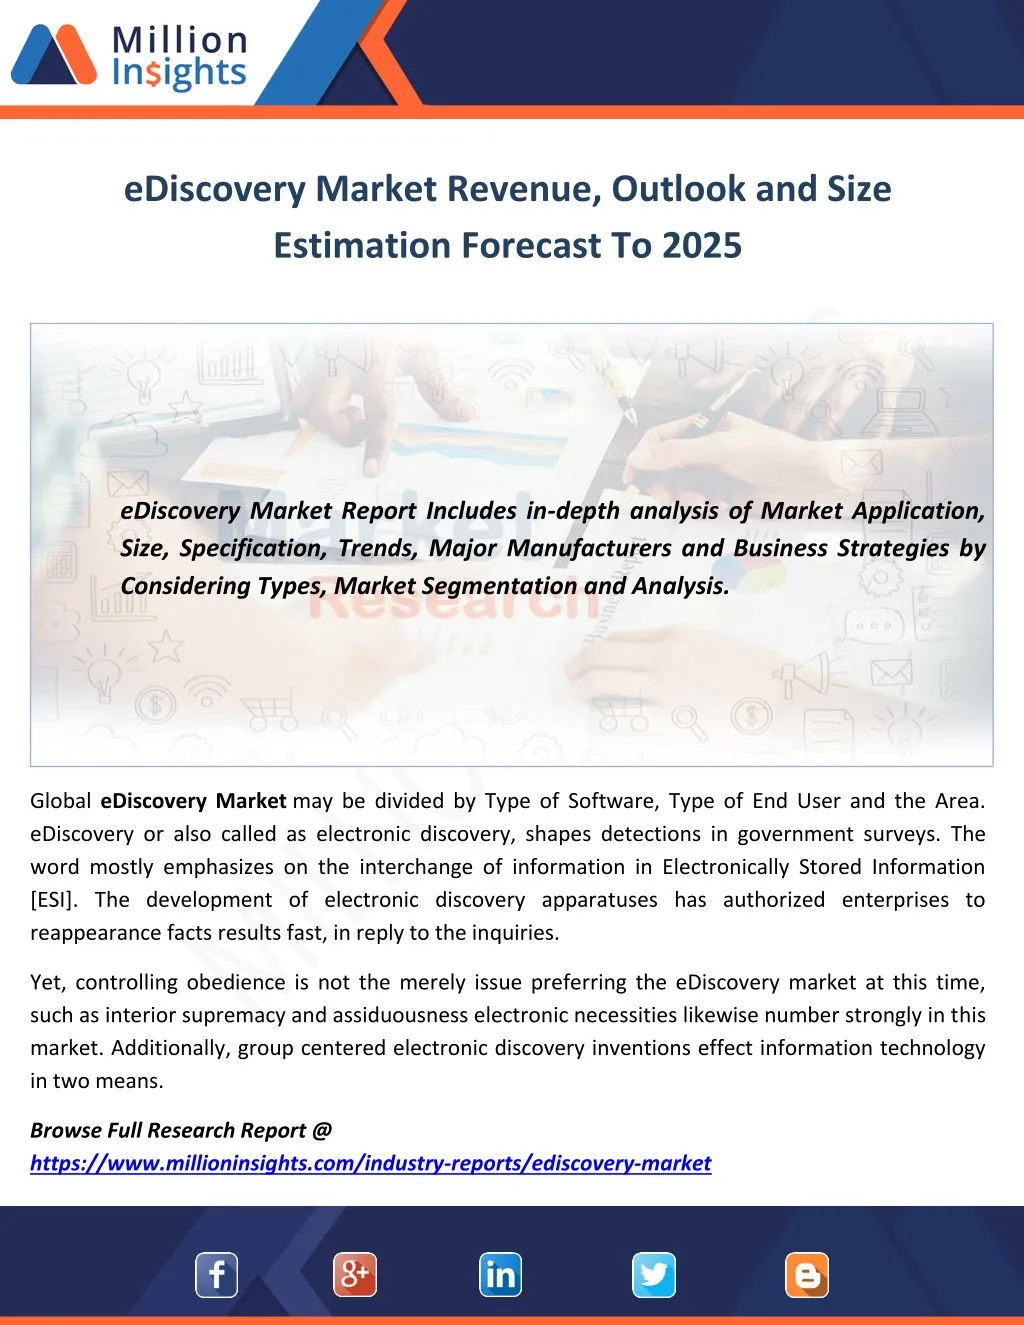 ediscovery market revenue outlook and size